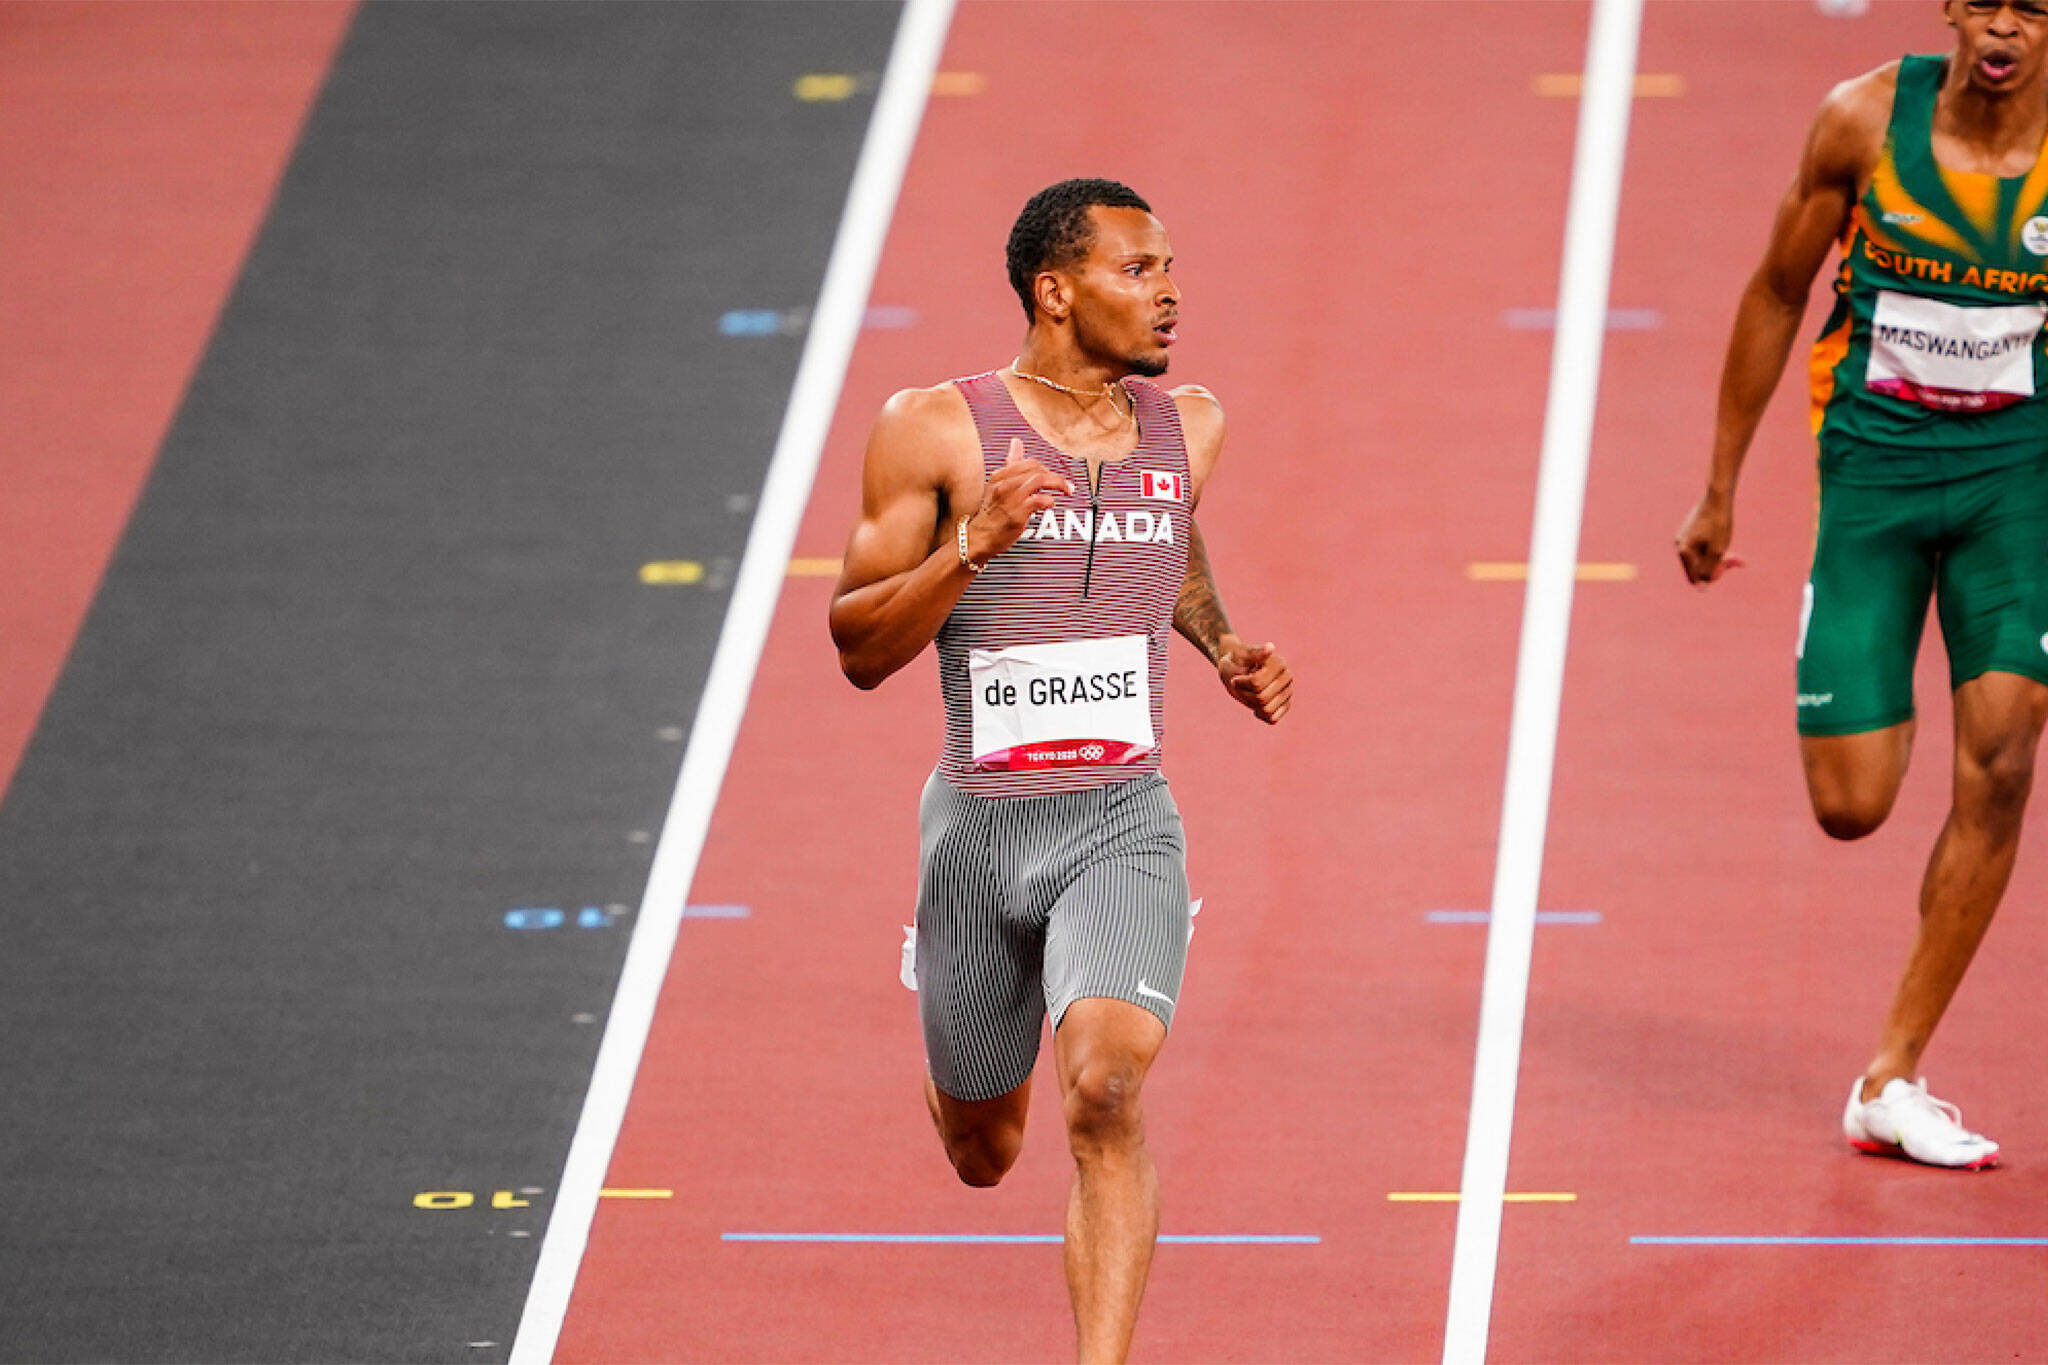 Andre De Grasse wins gold for Canada in 200m at Tokyo Olympics